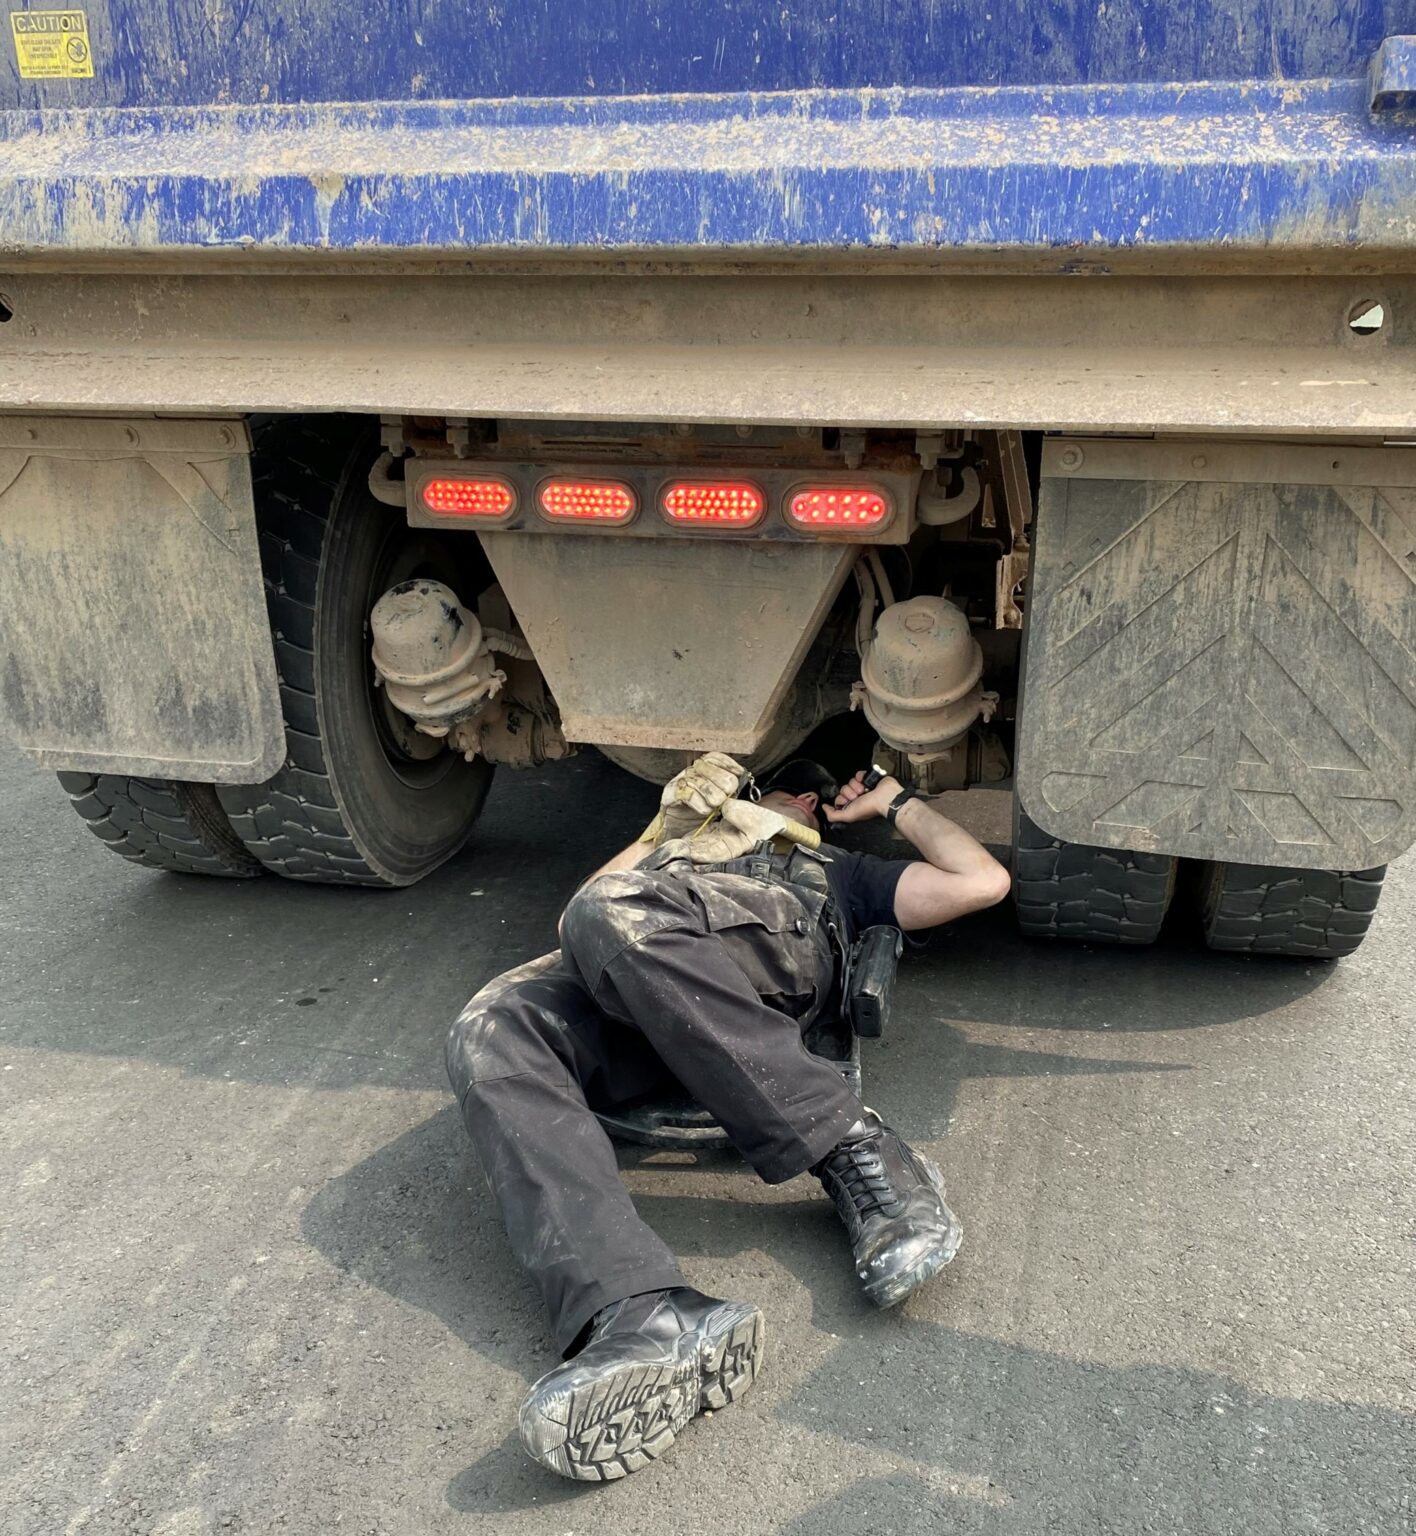 10% of vehicles were taken out of service on CVSA Brake Safety Day in Canada